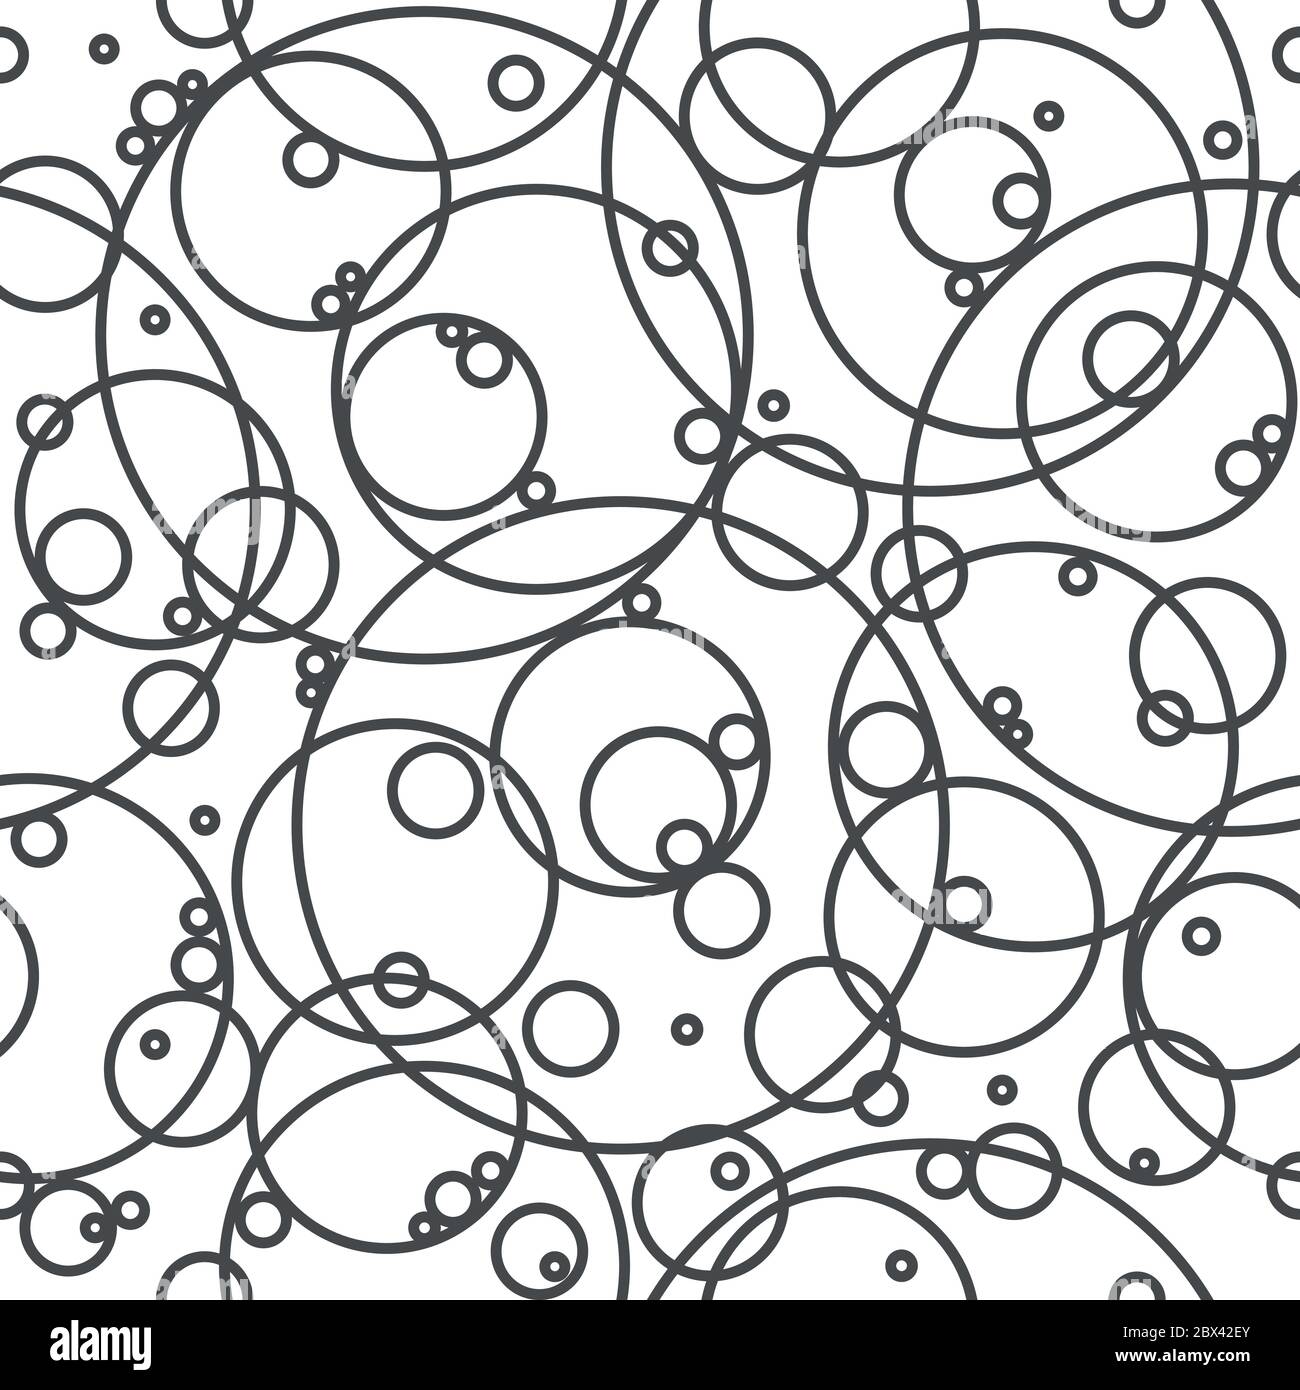 Seamless abstract pattern with black empty overlapping circles of different size. Bubbles and bulbs. White background. Vector. Calm classic design for Stock Vector